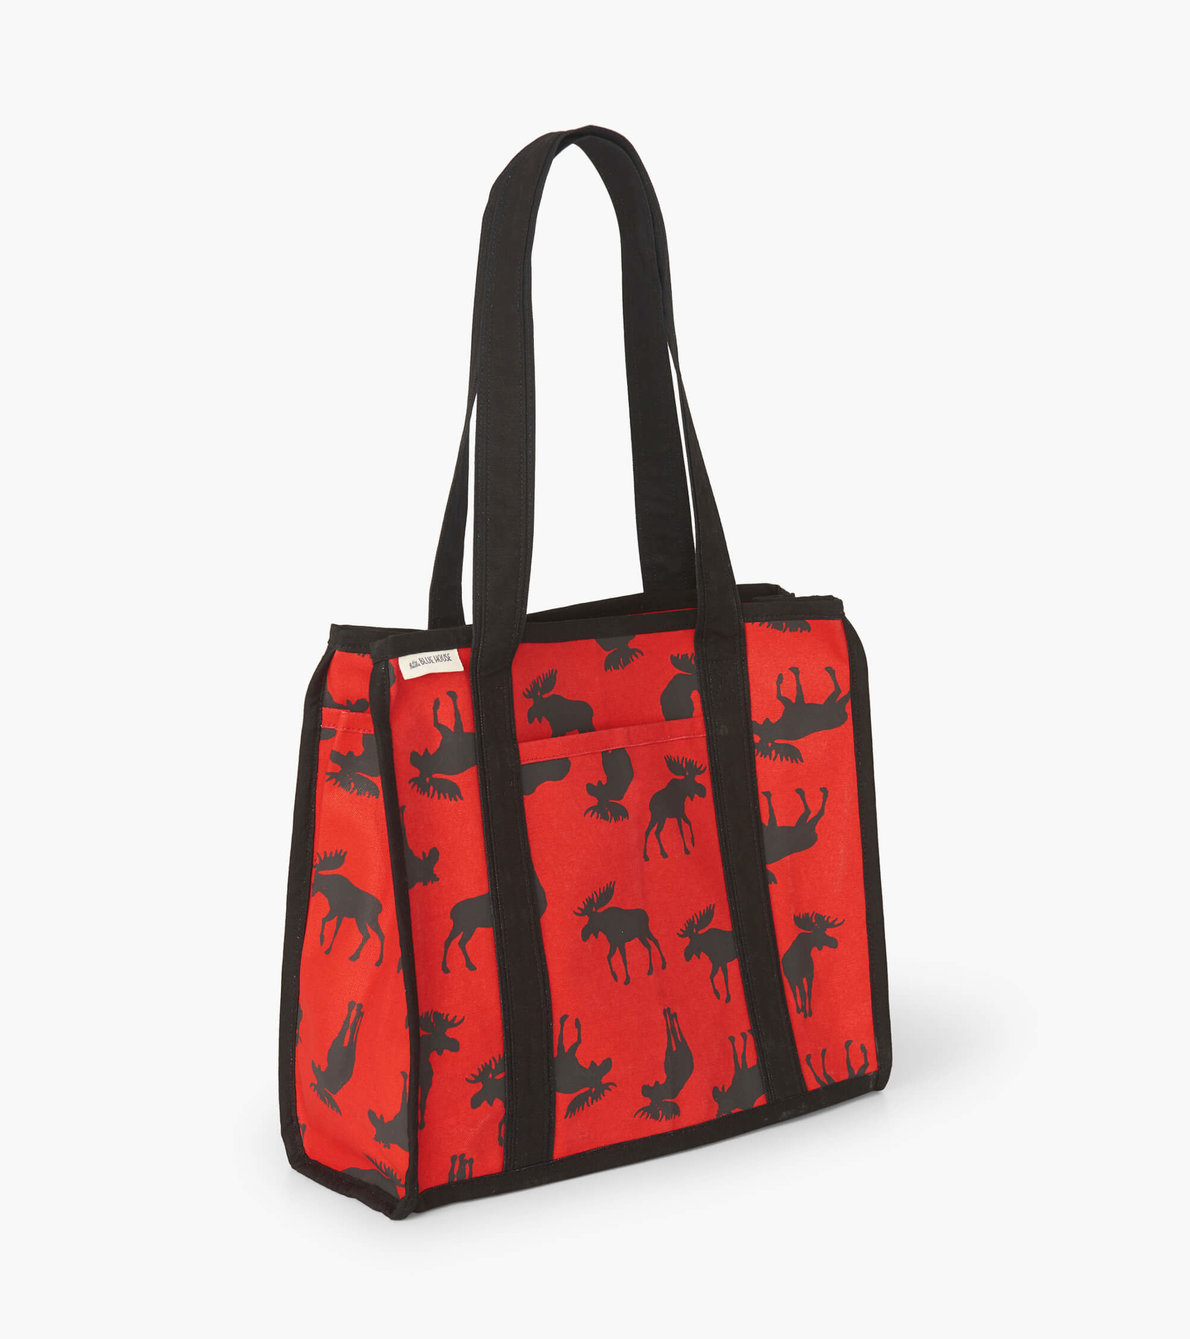 View larger image of Moose on Red Canvas Tote Bag